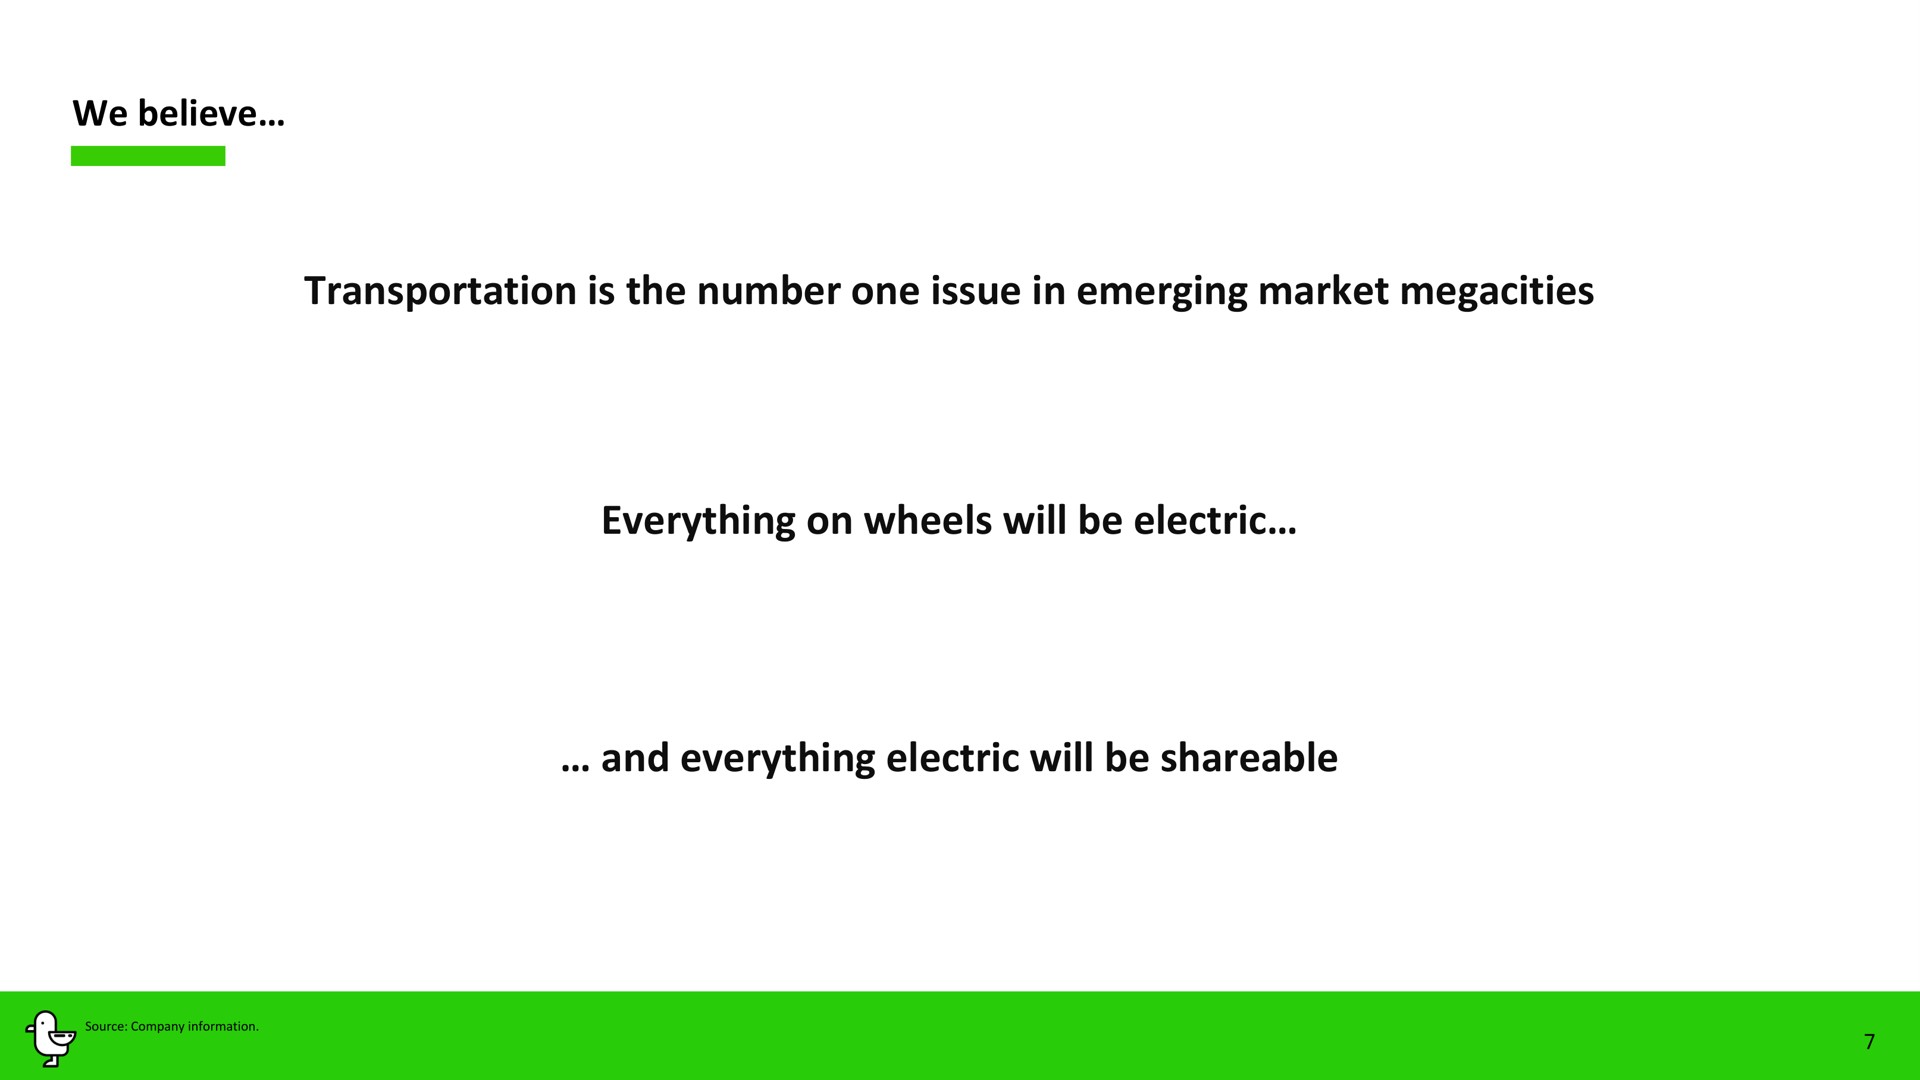 we believe transportation is the number one issue in emerging market everything on wheels will be electric and everything electric will be shareable as | Marti